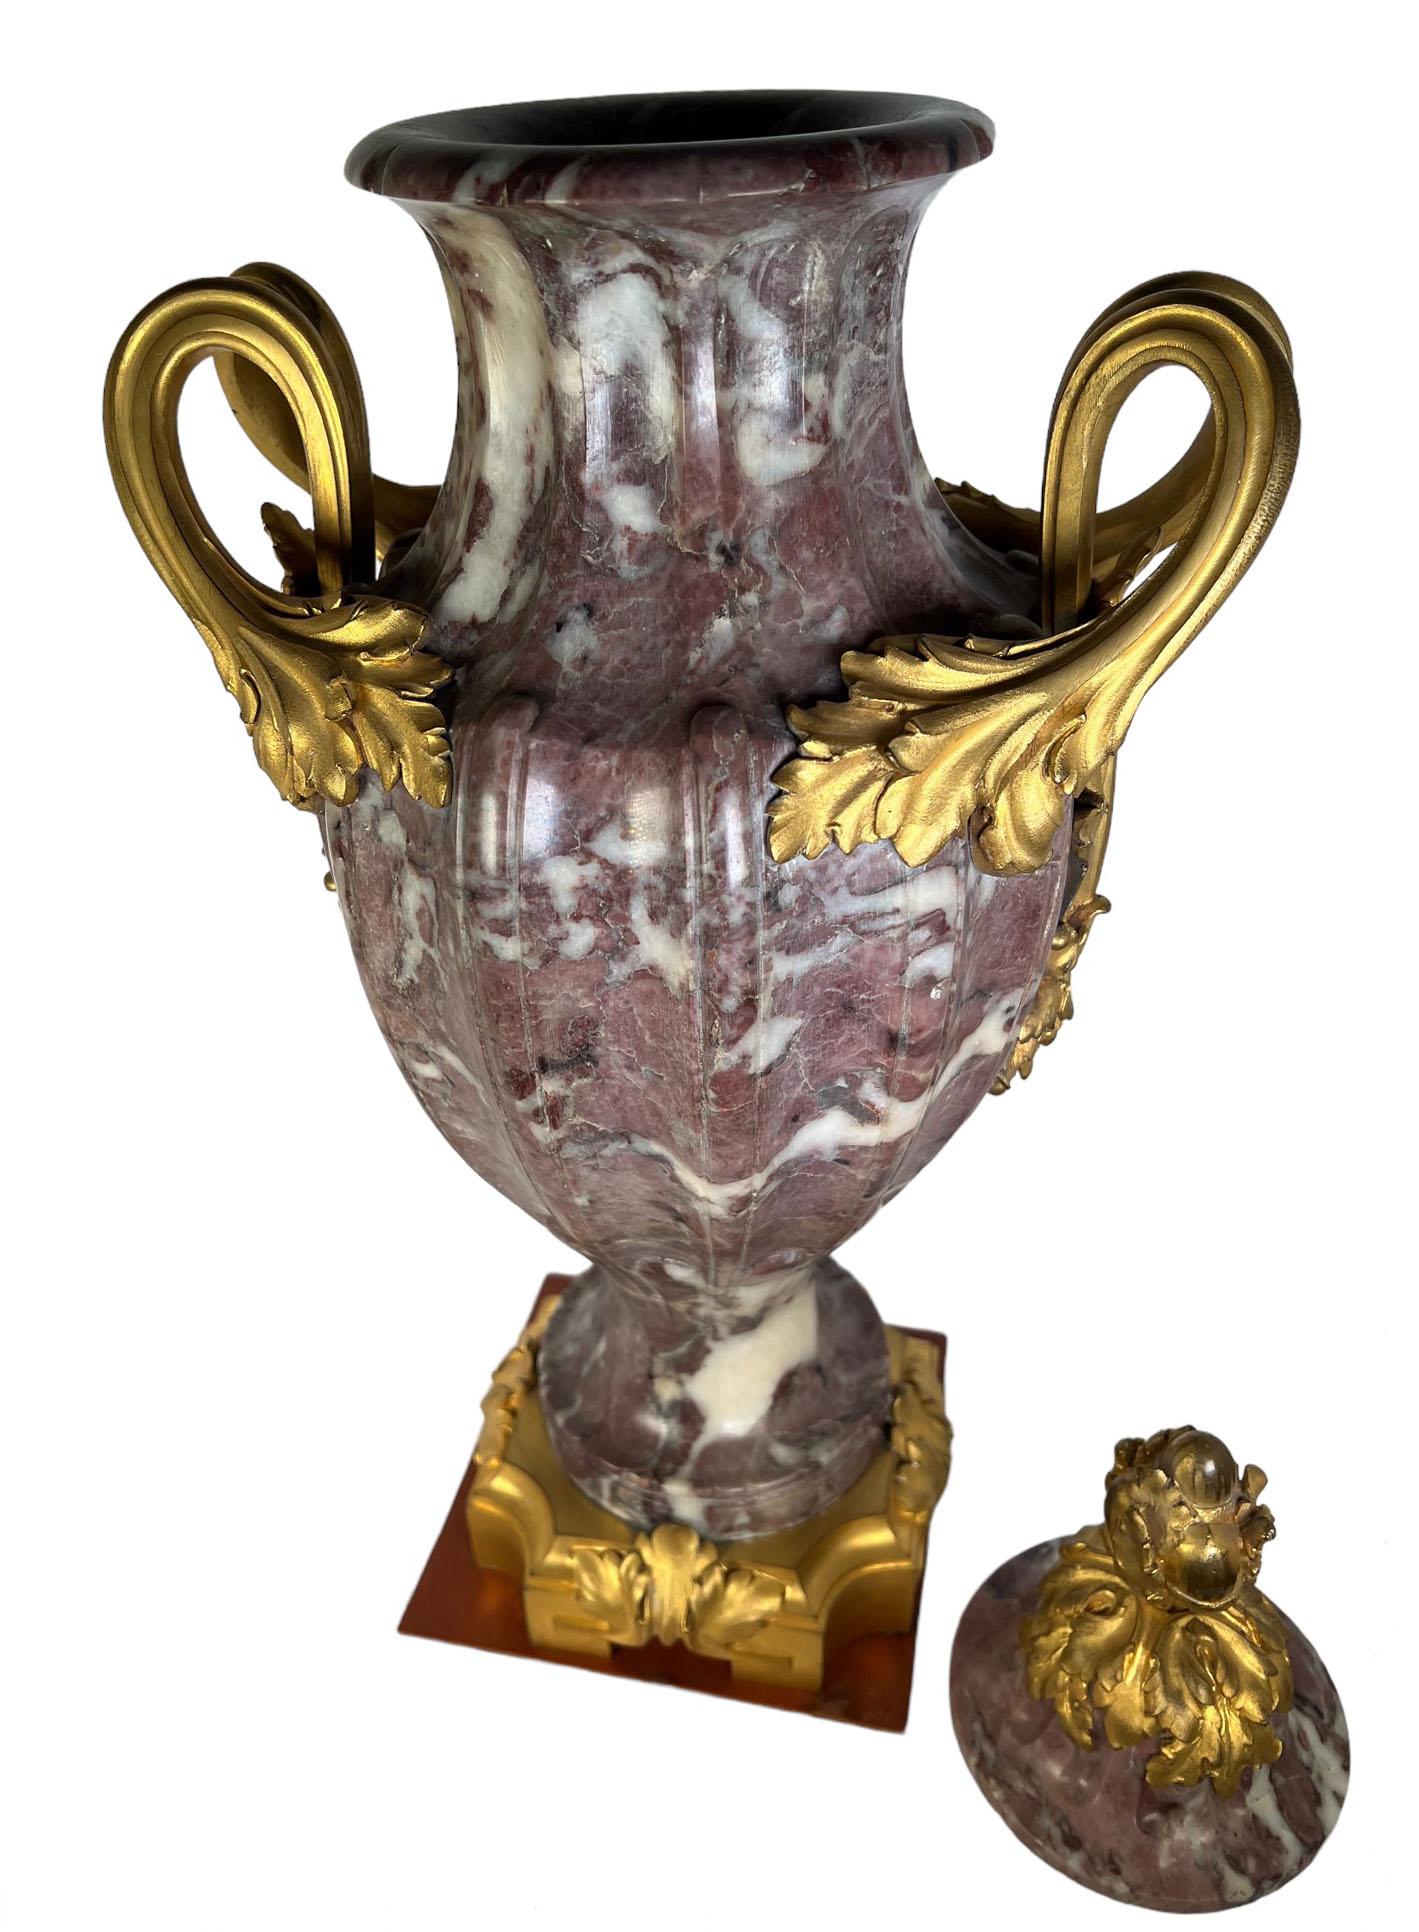 F. Rambaud signed purple fluted marble urn with bronze doré mounts, handles and lid with Paris foundry mark. Circa 1870.